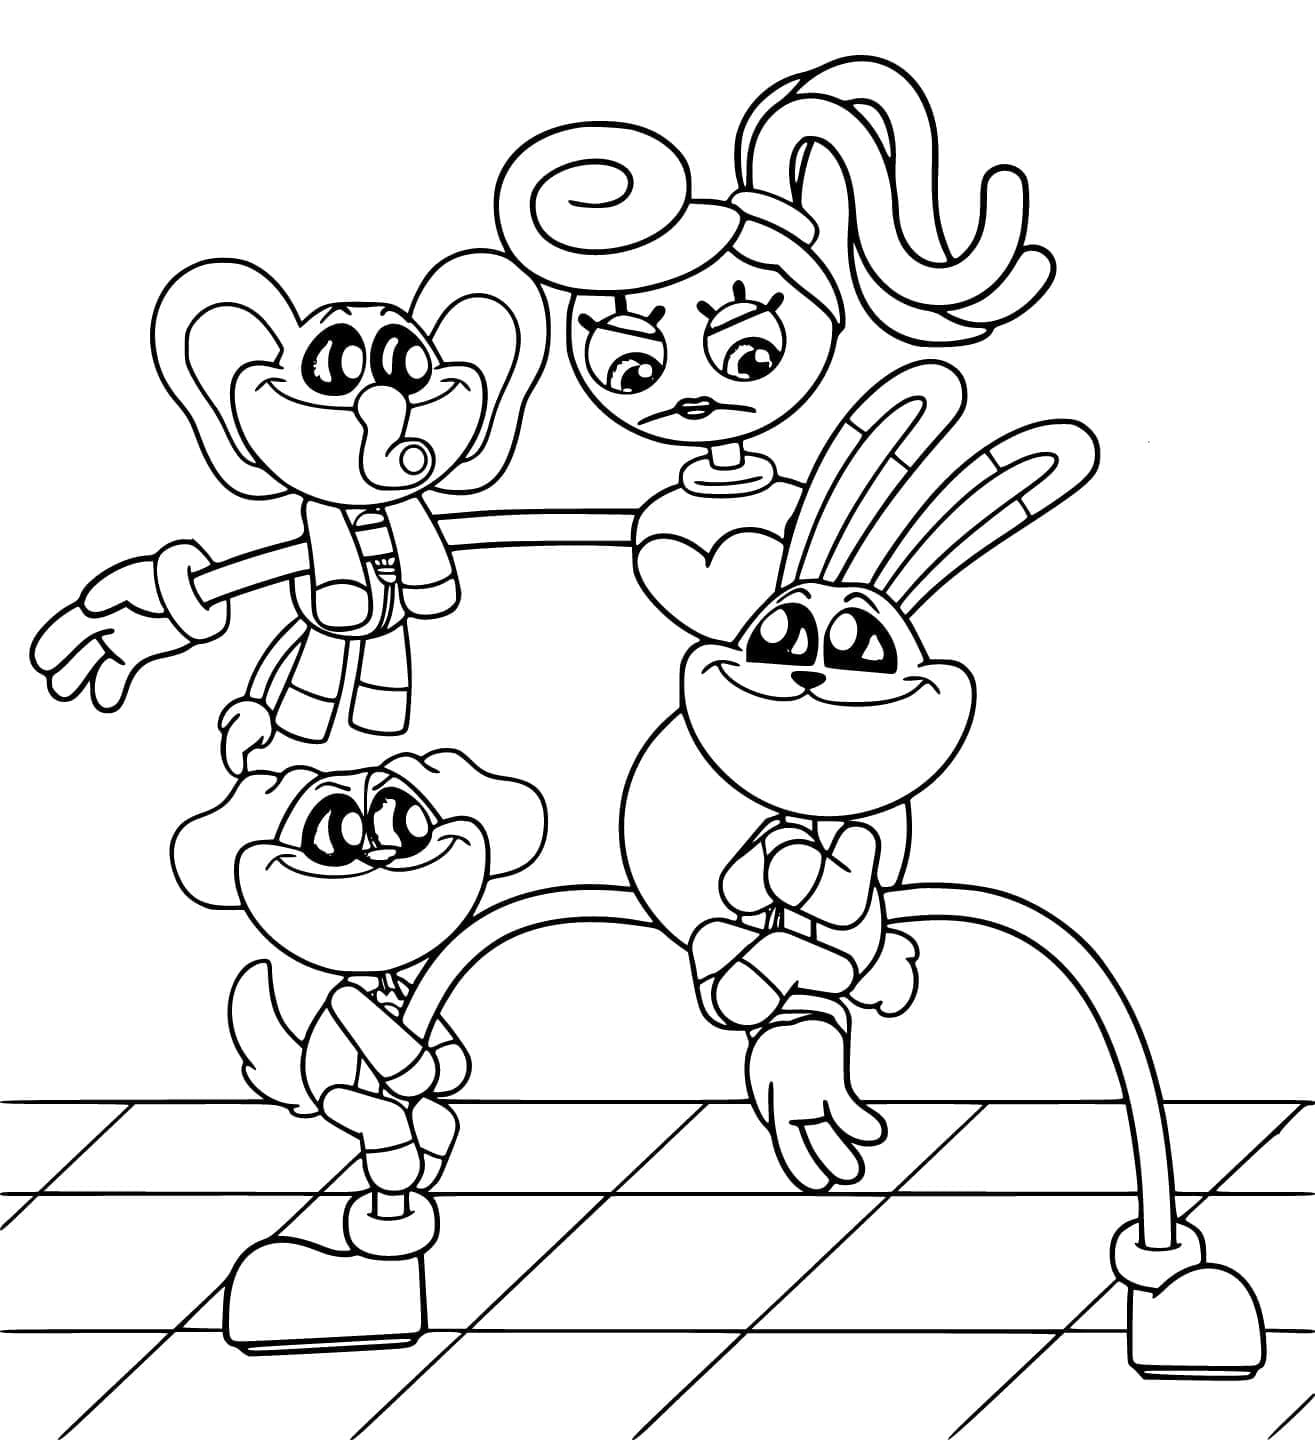 Mommy Long Legs et Smiling Critters coloring page